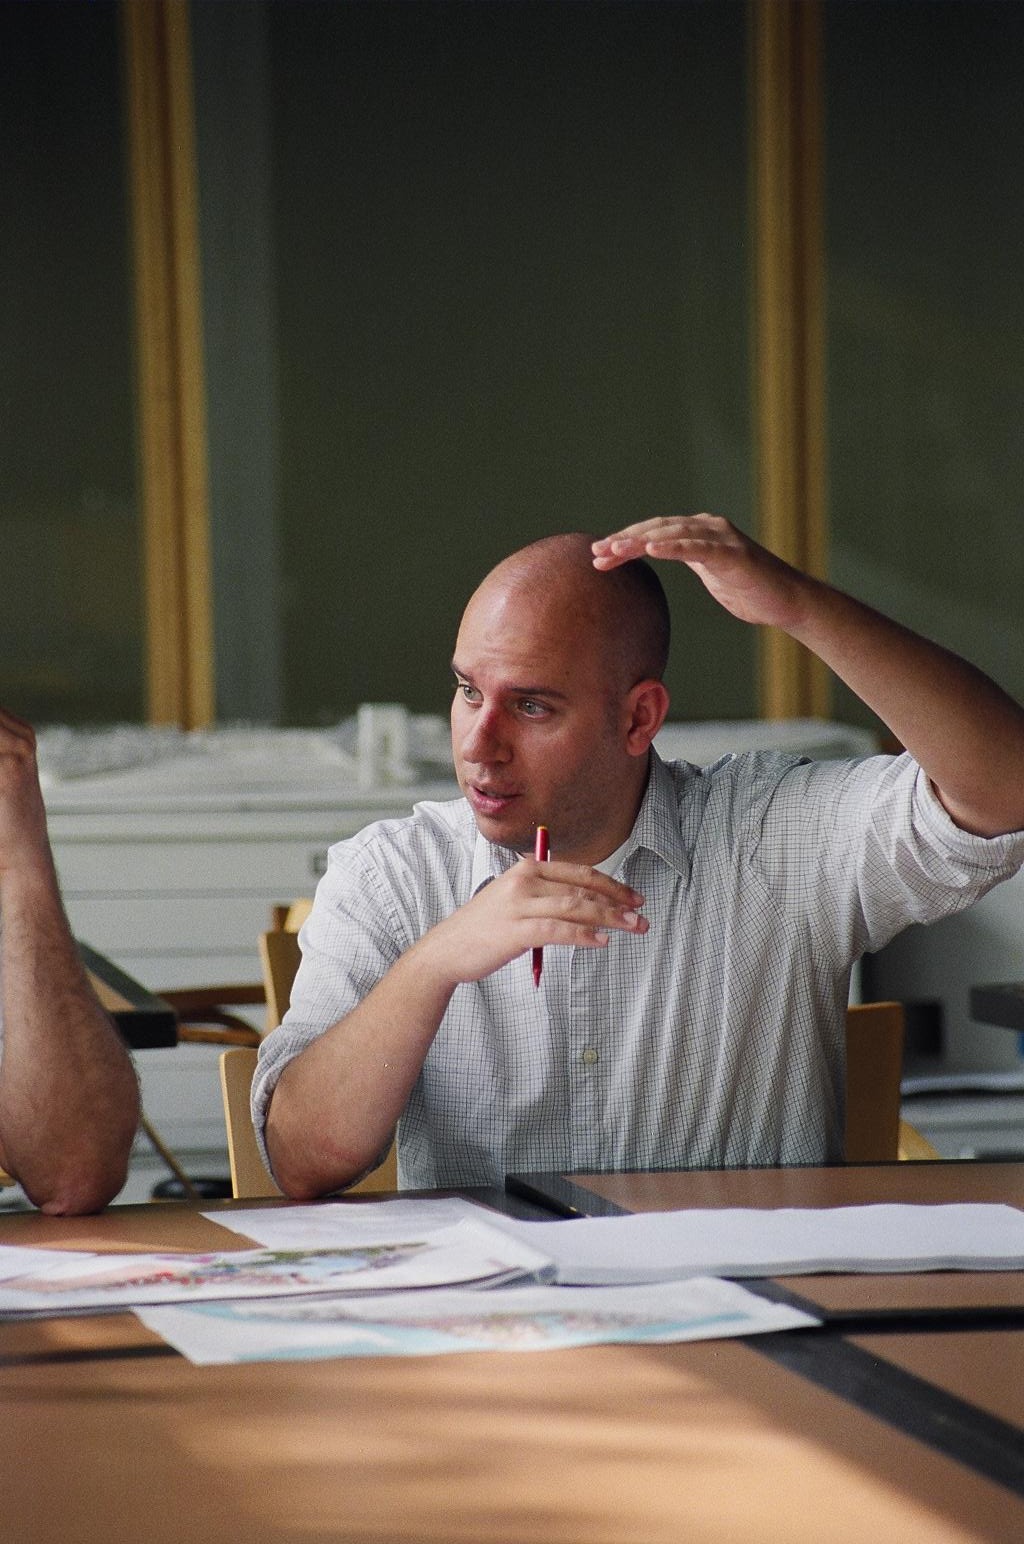 A photo of Grove talking to a colleague during a worksession